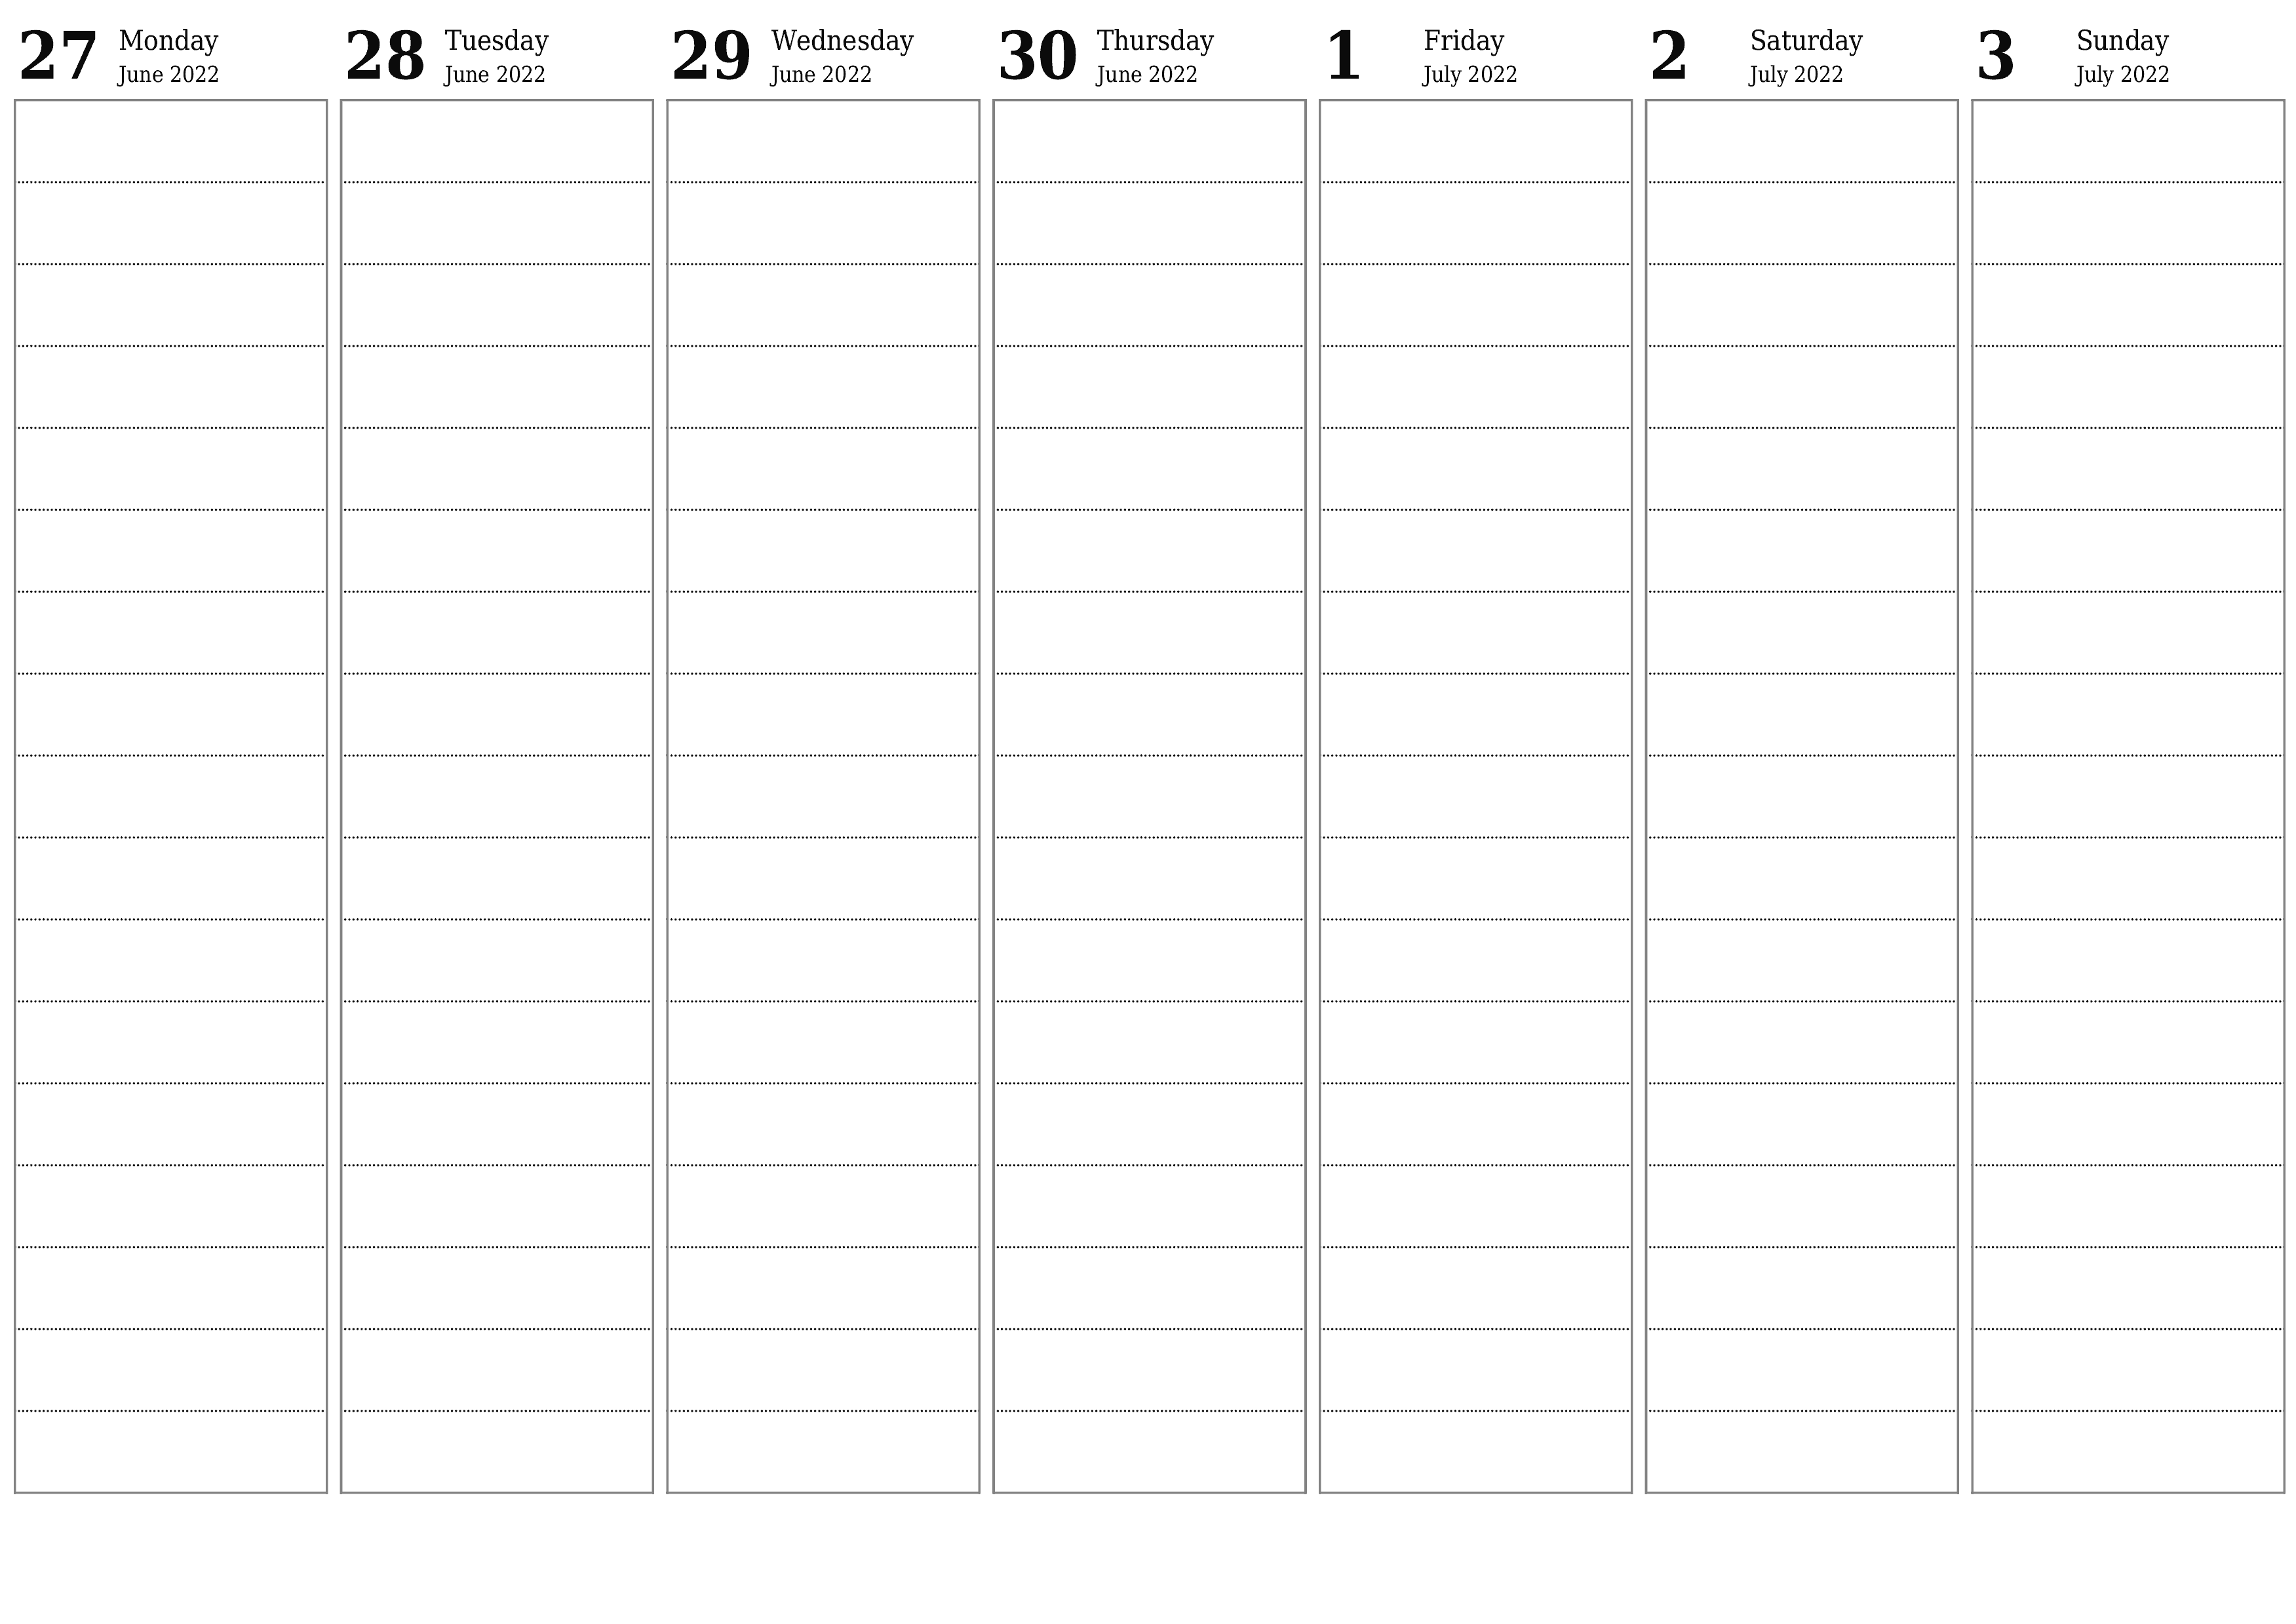 Blank weekly printable calendar and planner for week July 2022 with notes, save and print to PDF PNG English - 7calendar.com